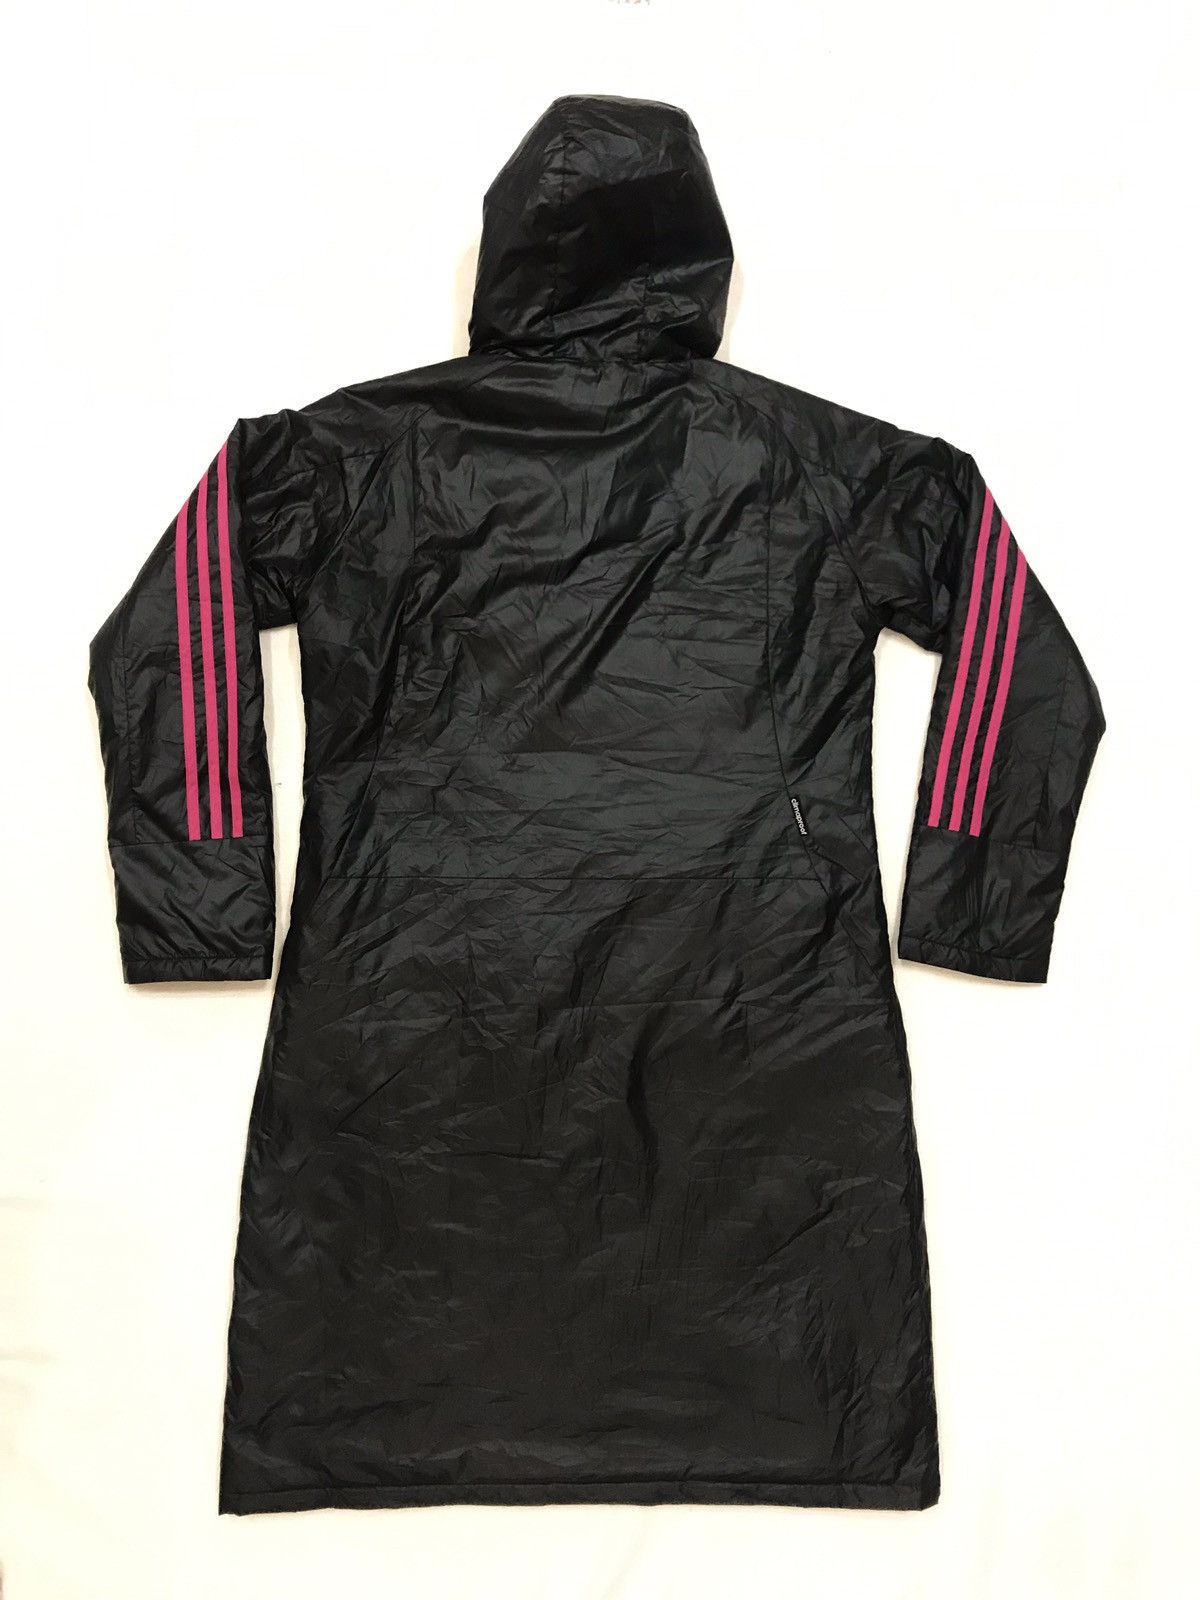 Adidas ADIDAS 3 STRIPES LONG PUFFER JACKET PARKA HOODED Size US S / EU 44-46 / 1 - 2 Preview